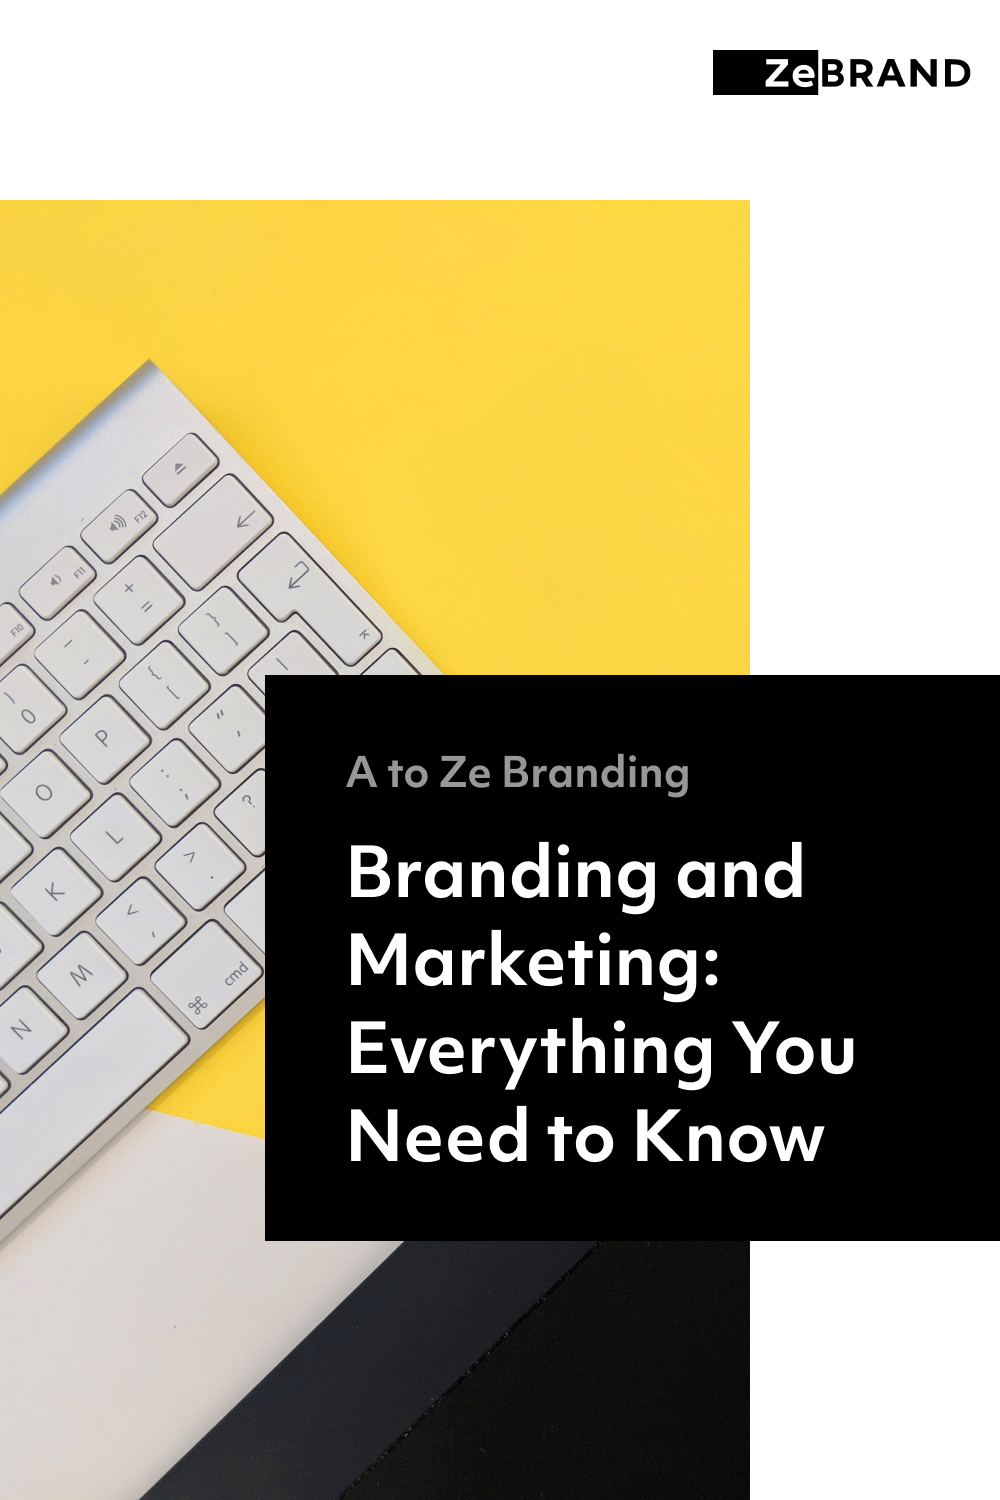 Branding and Marketing - Everything You Need to Know